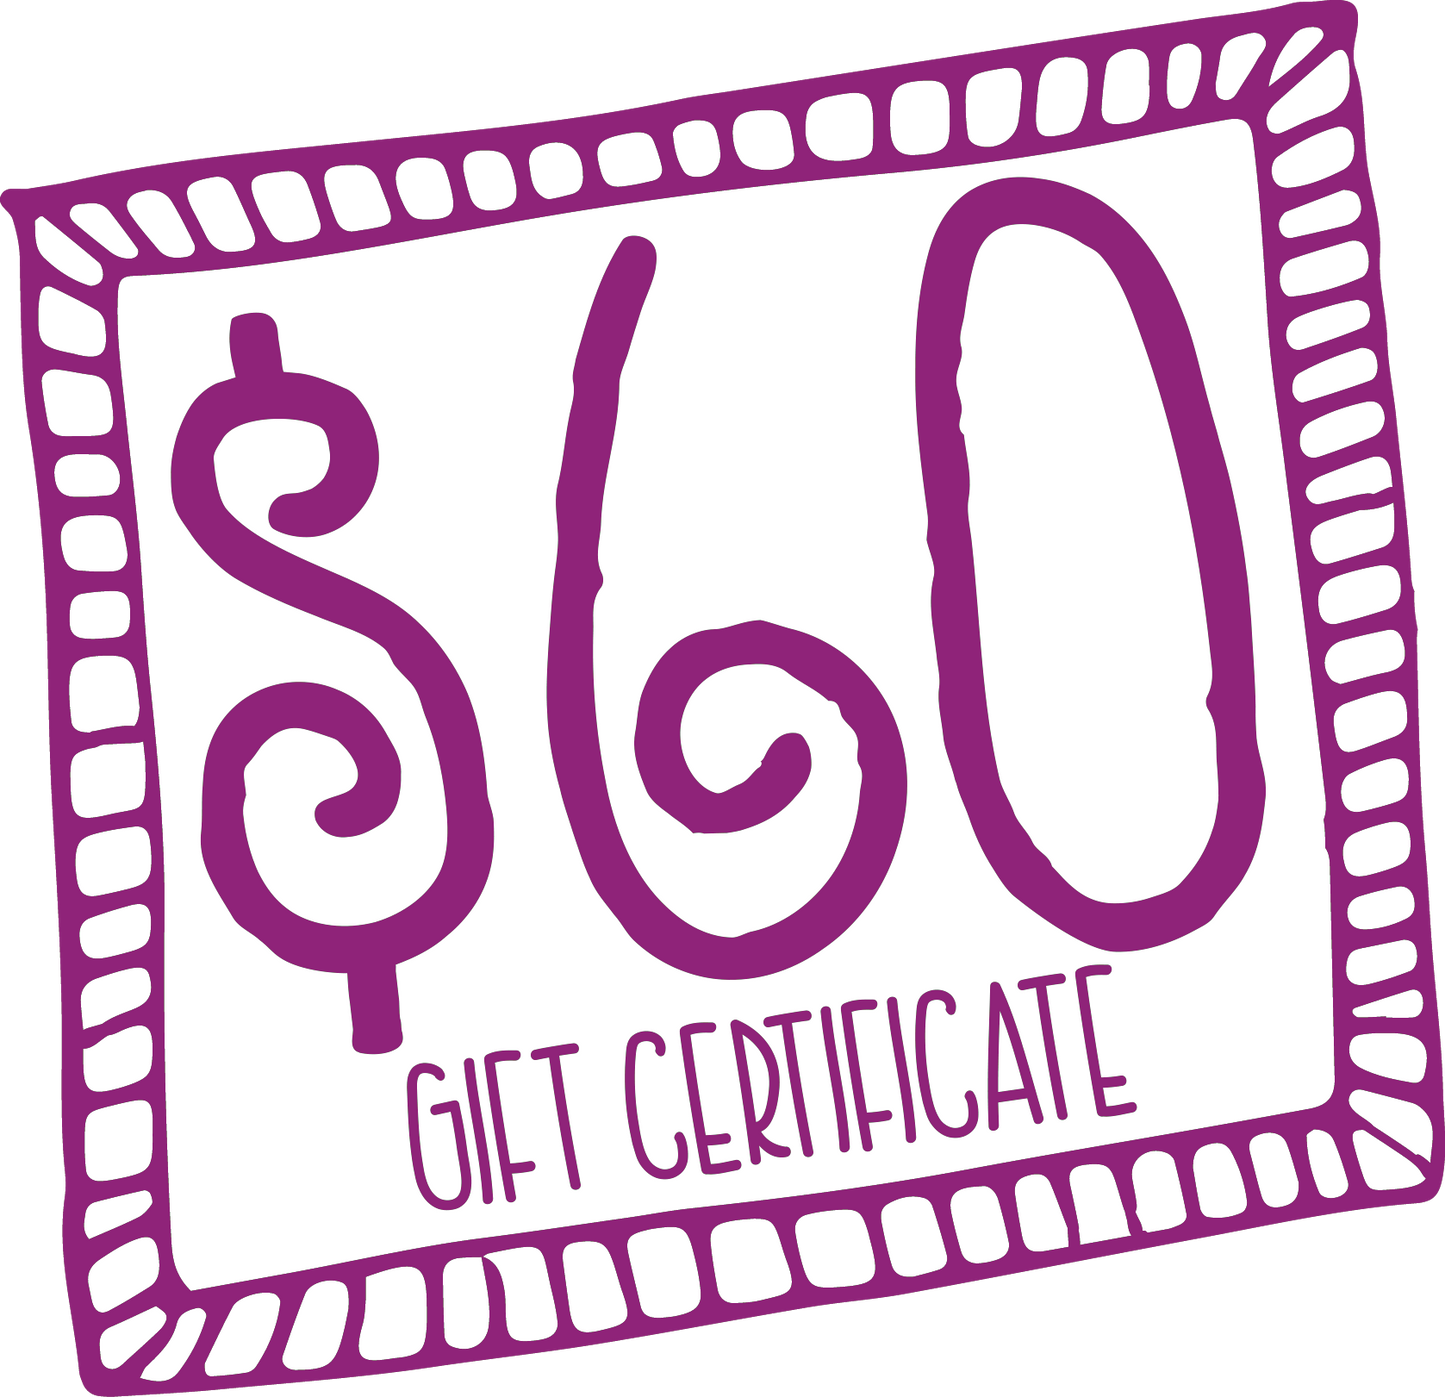 Gift Certificate for $60